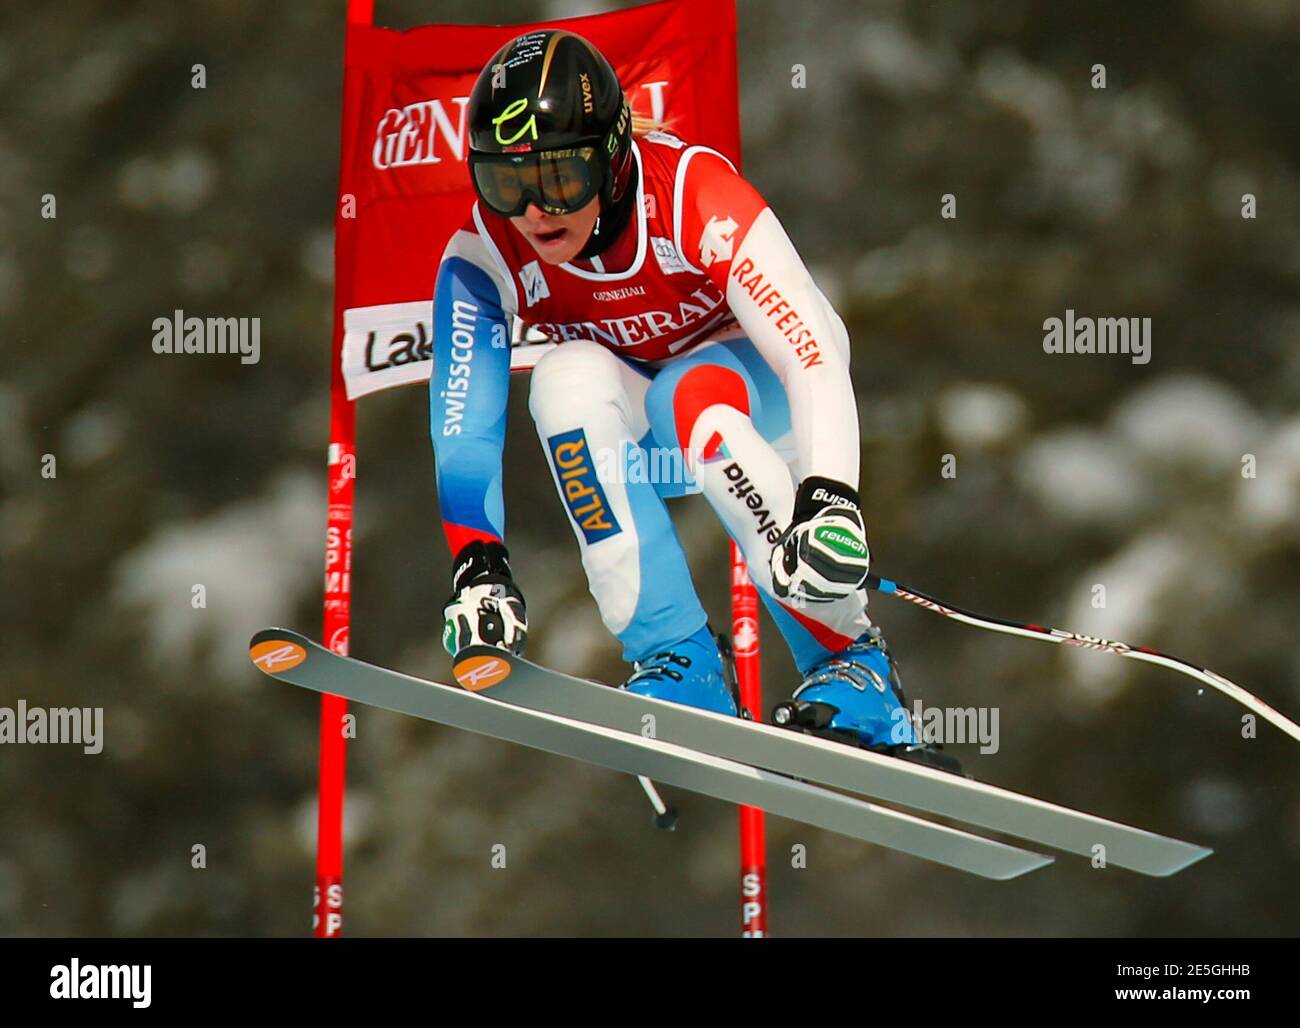 Lara Gut of Switzerland takes air during alpine skiing training for the Women's World Cup Downhill in Lake Louise, Alberta, November 27, 2012.  REUTERS/Mike Blake  (CANADA - Tags: SPORT SKIING) Stock Photo